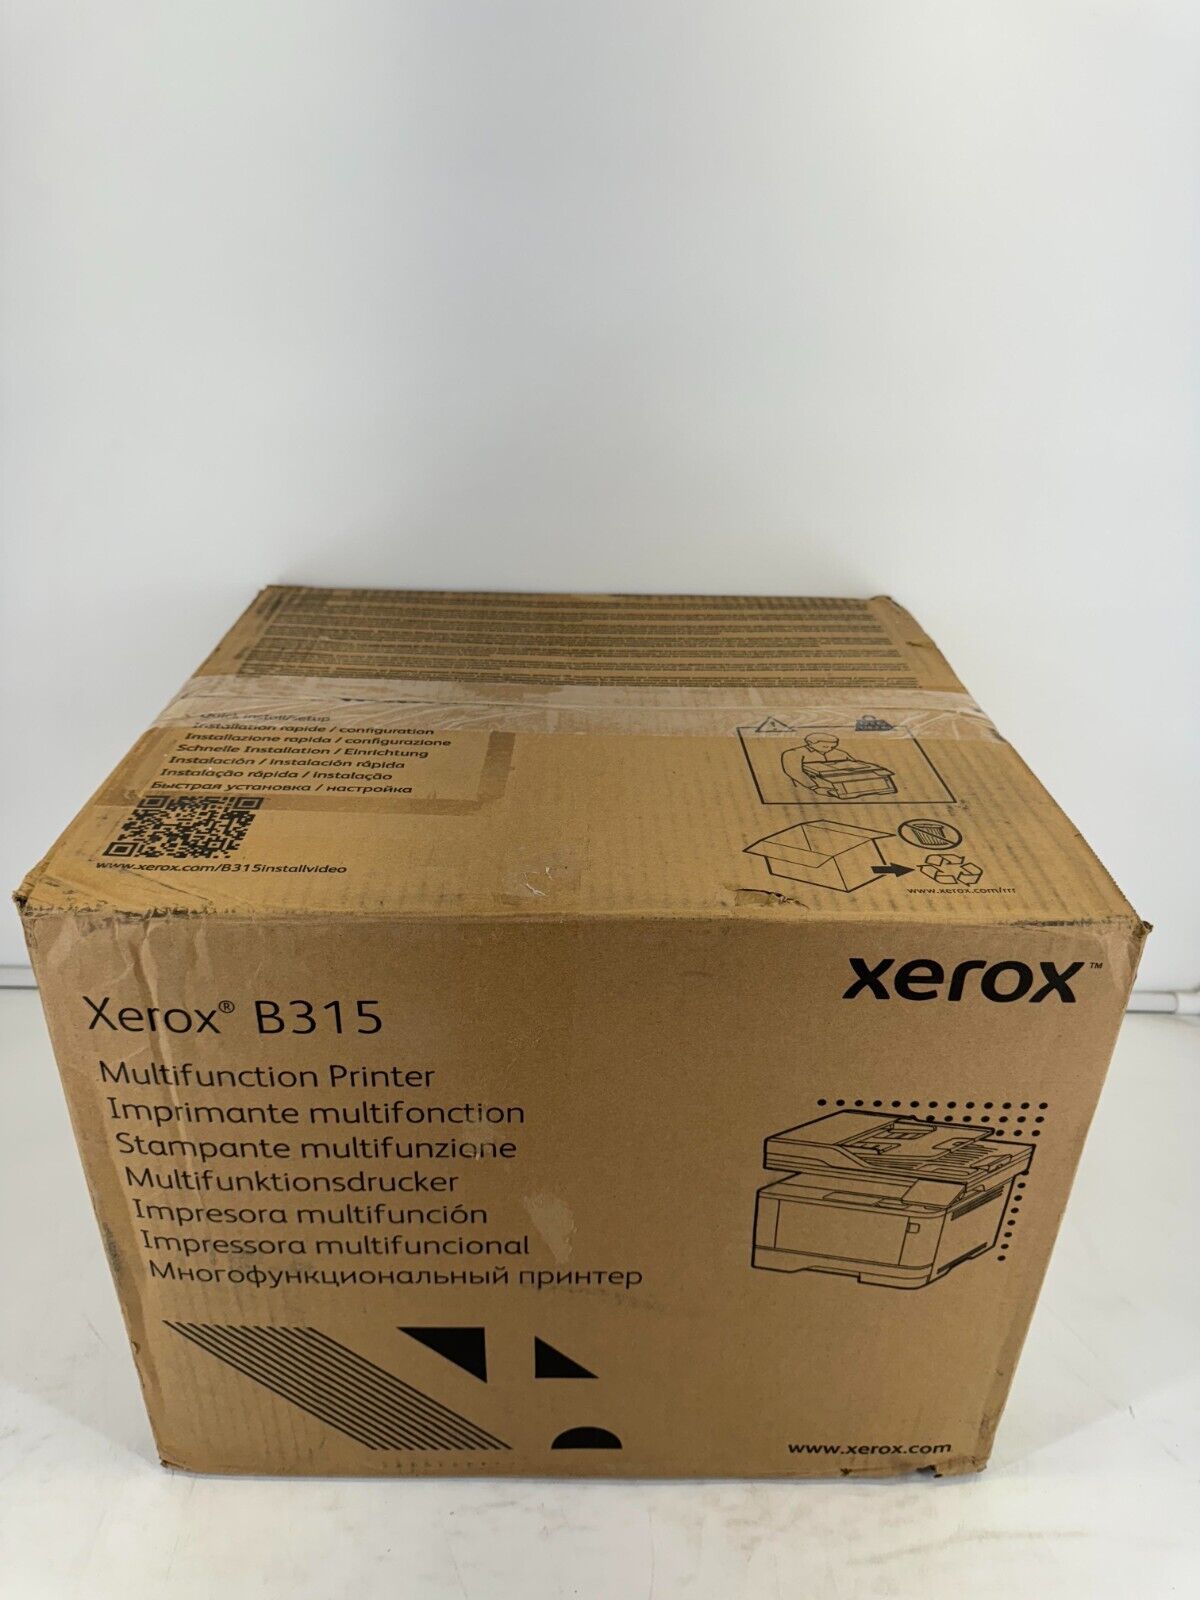 Xerox B315/DNI Monochrome All-in-One Multifunction Printer - Total 5 Pages